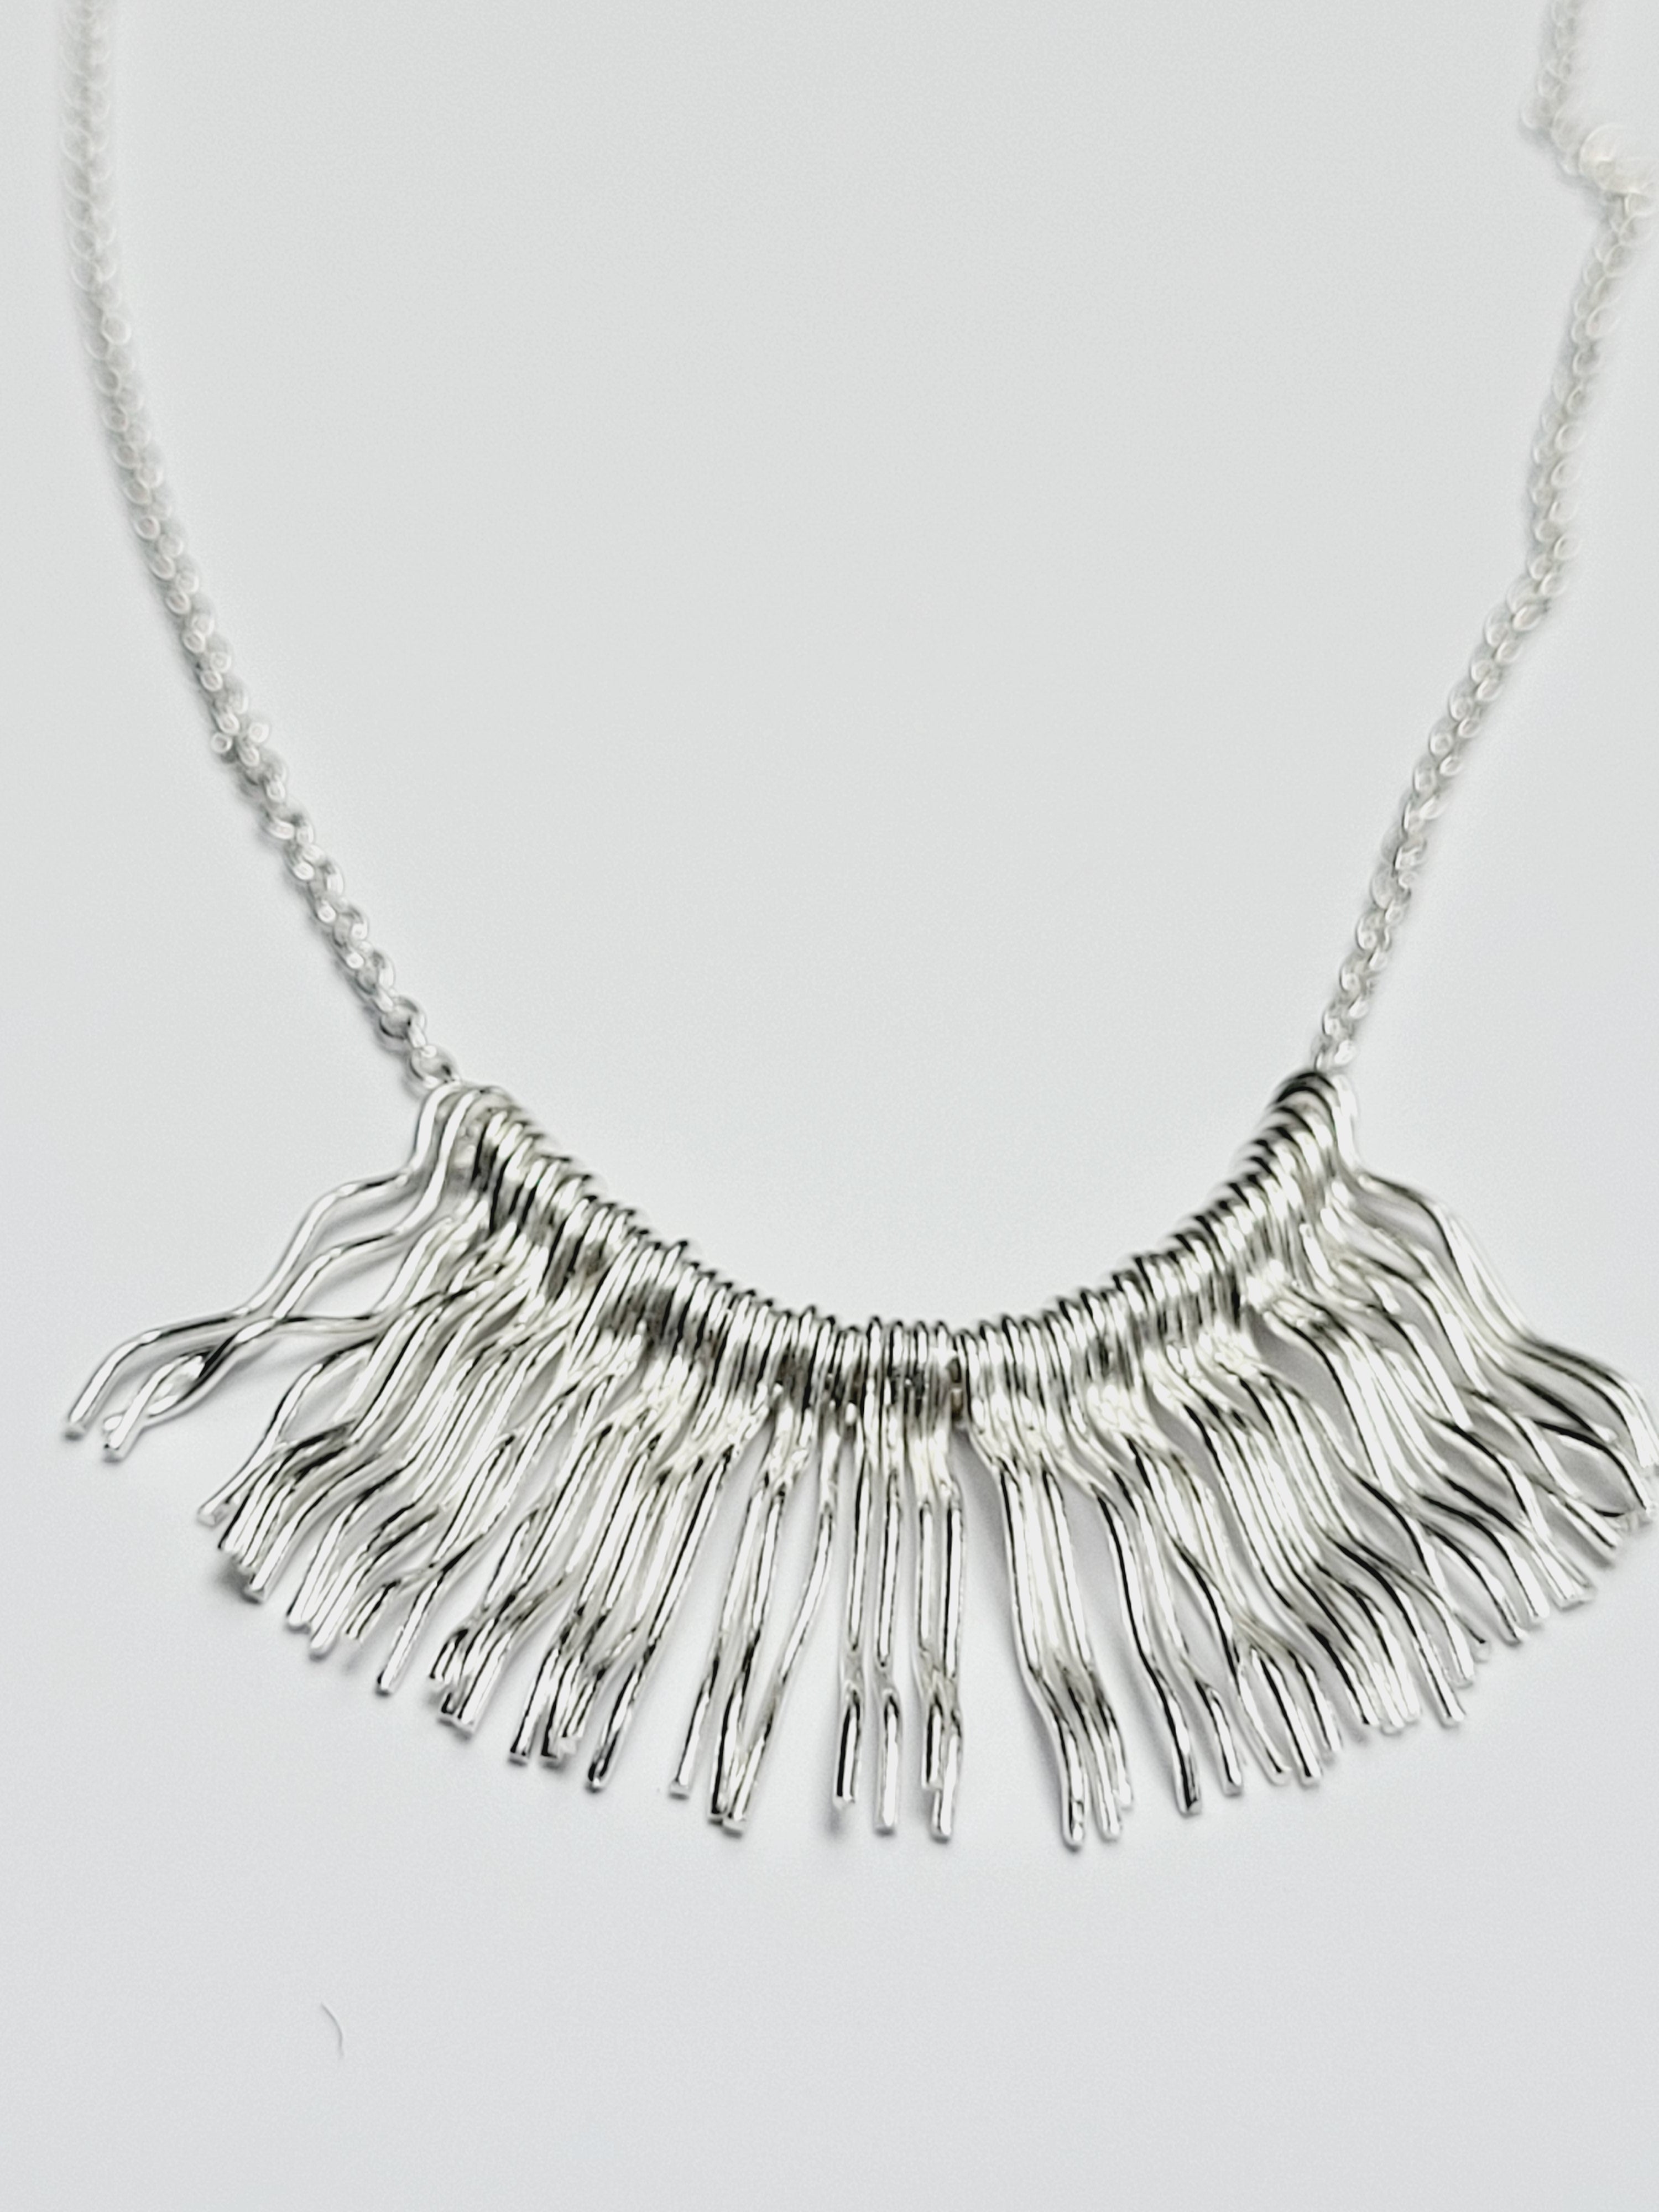 Wiggle Necklace - Sterling Silver